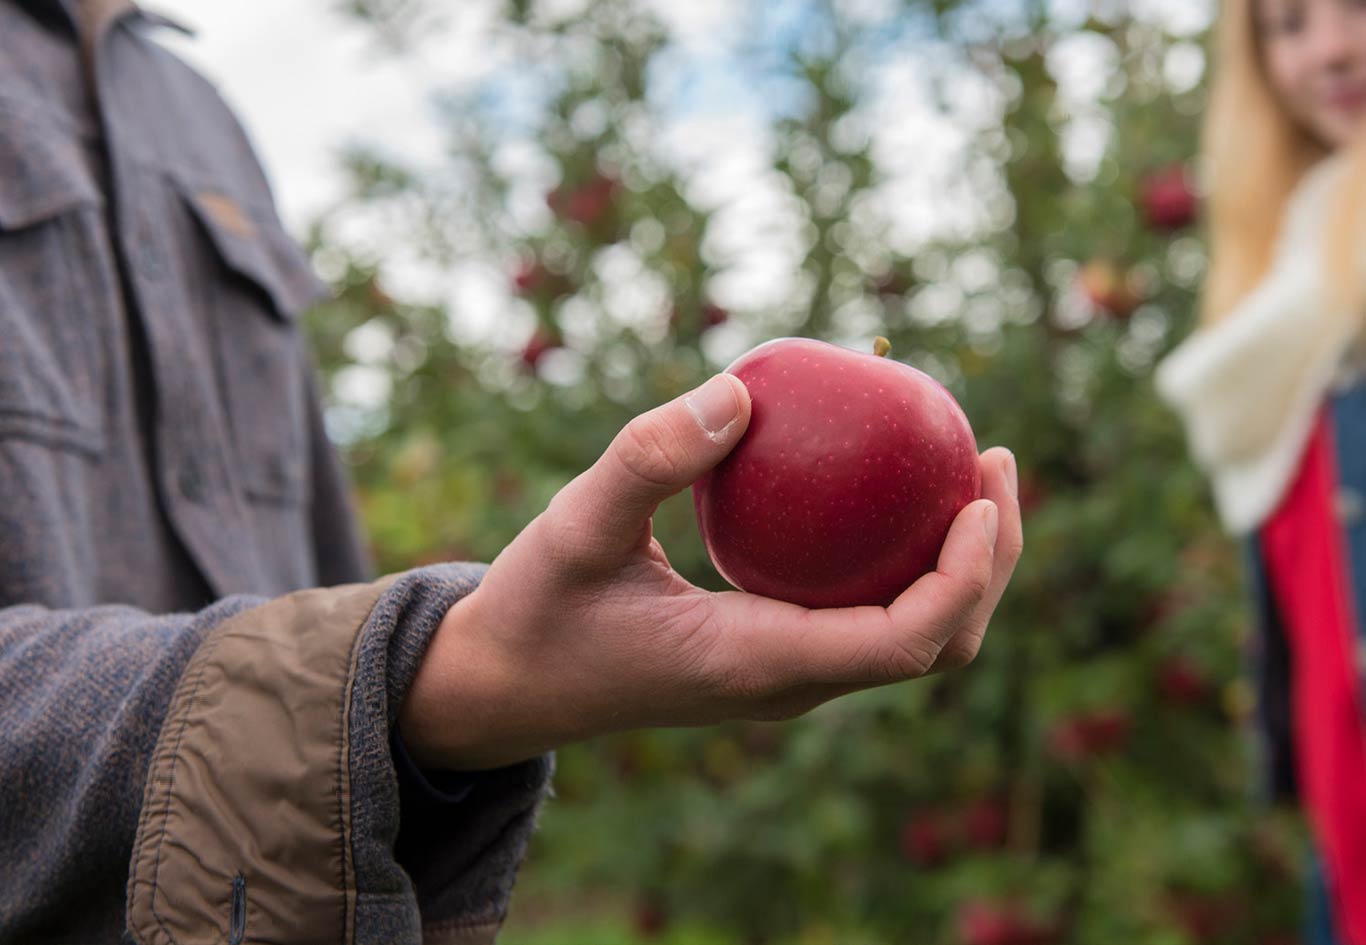 Man holding a just-picked apple in Ulster County, NY